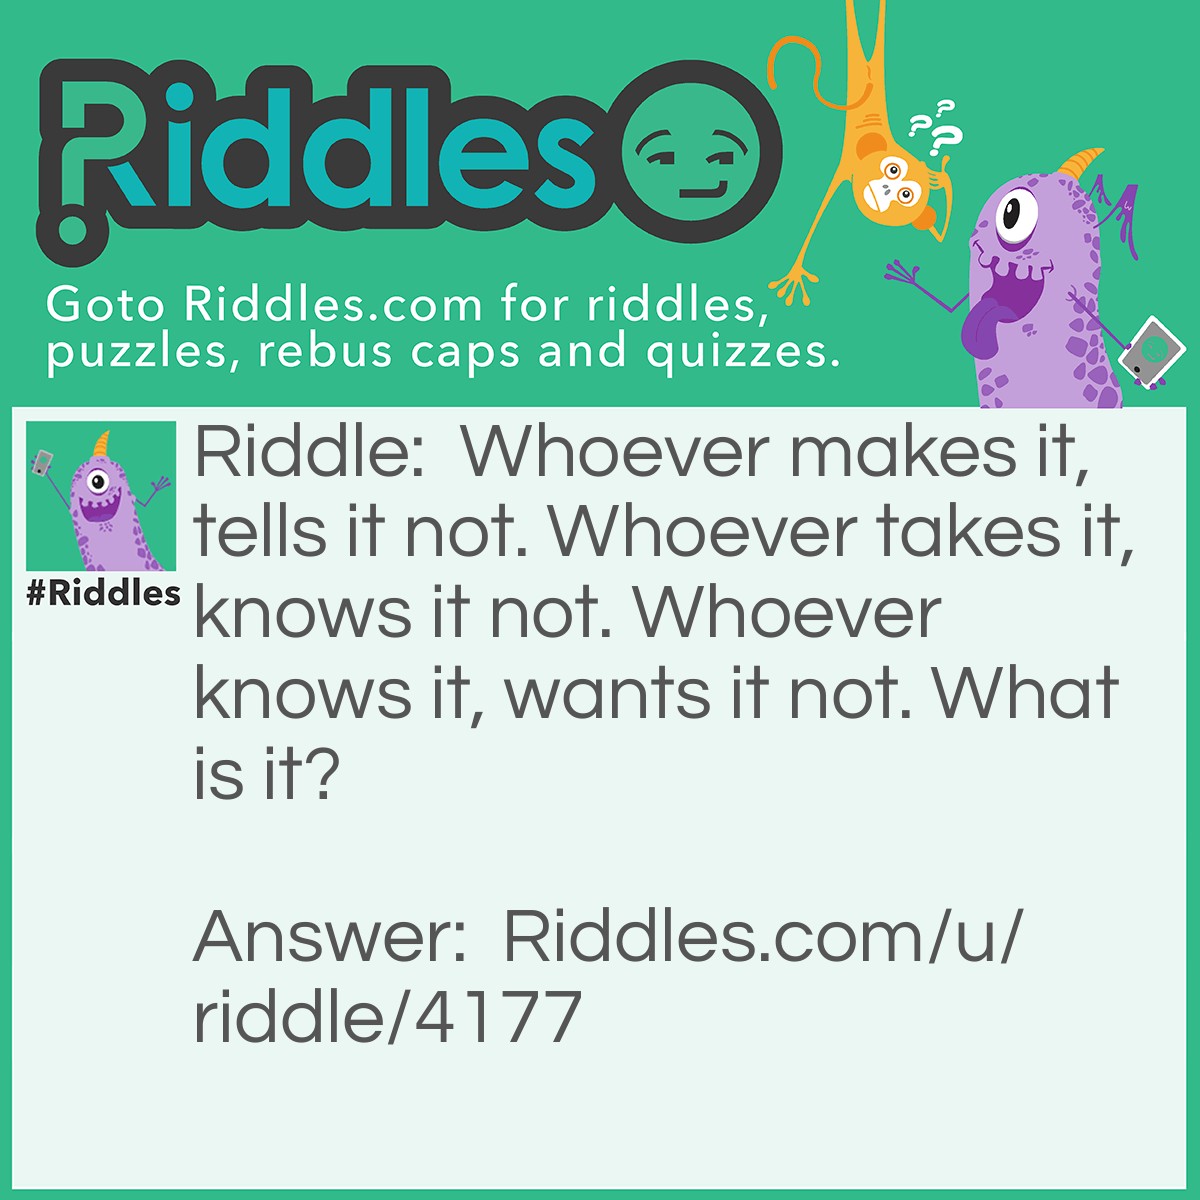 Riddle: Whoever makes it, tells it not. Whoever takes it, knows it not. Whoever knows it, wants it not. What is it? Answer: Counterfeit money.